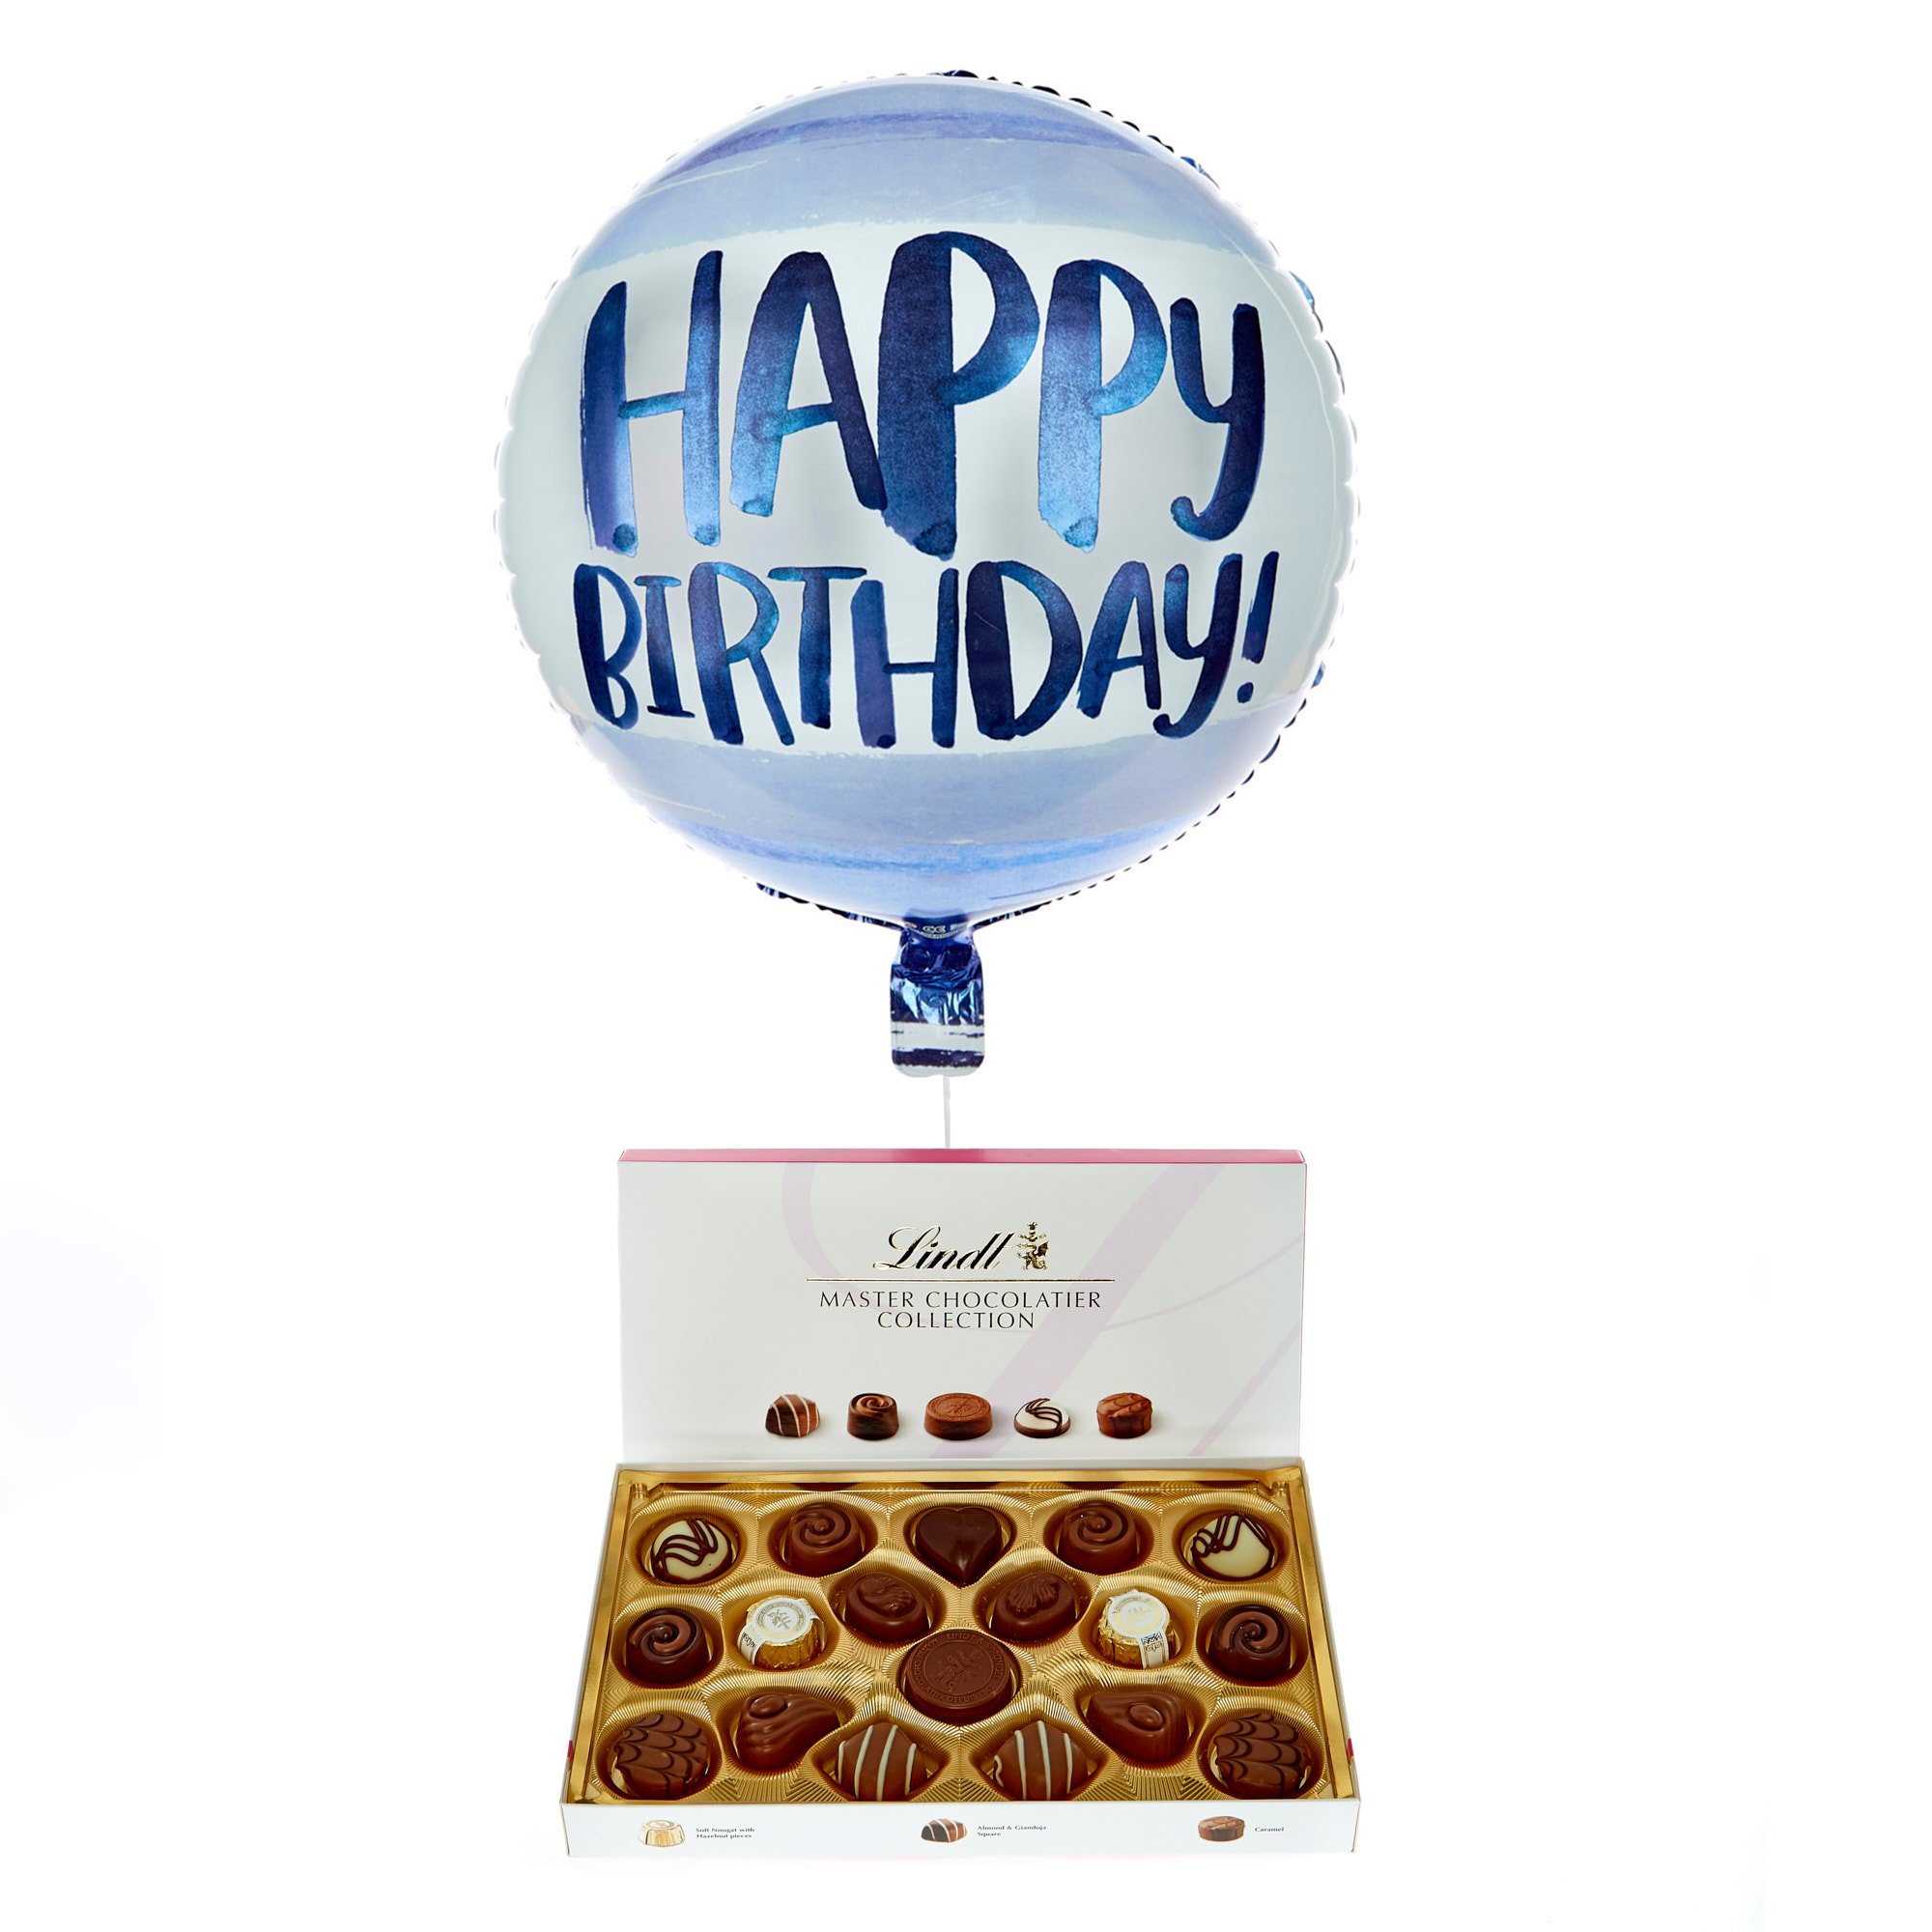 Blue Watercolour Happy Birthday Balloon & Lindt Chocolates - FREE GIFT CARD!